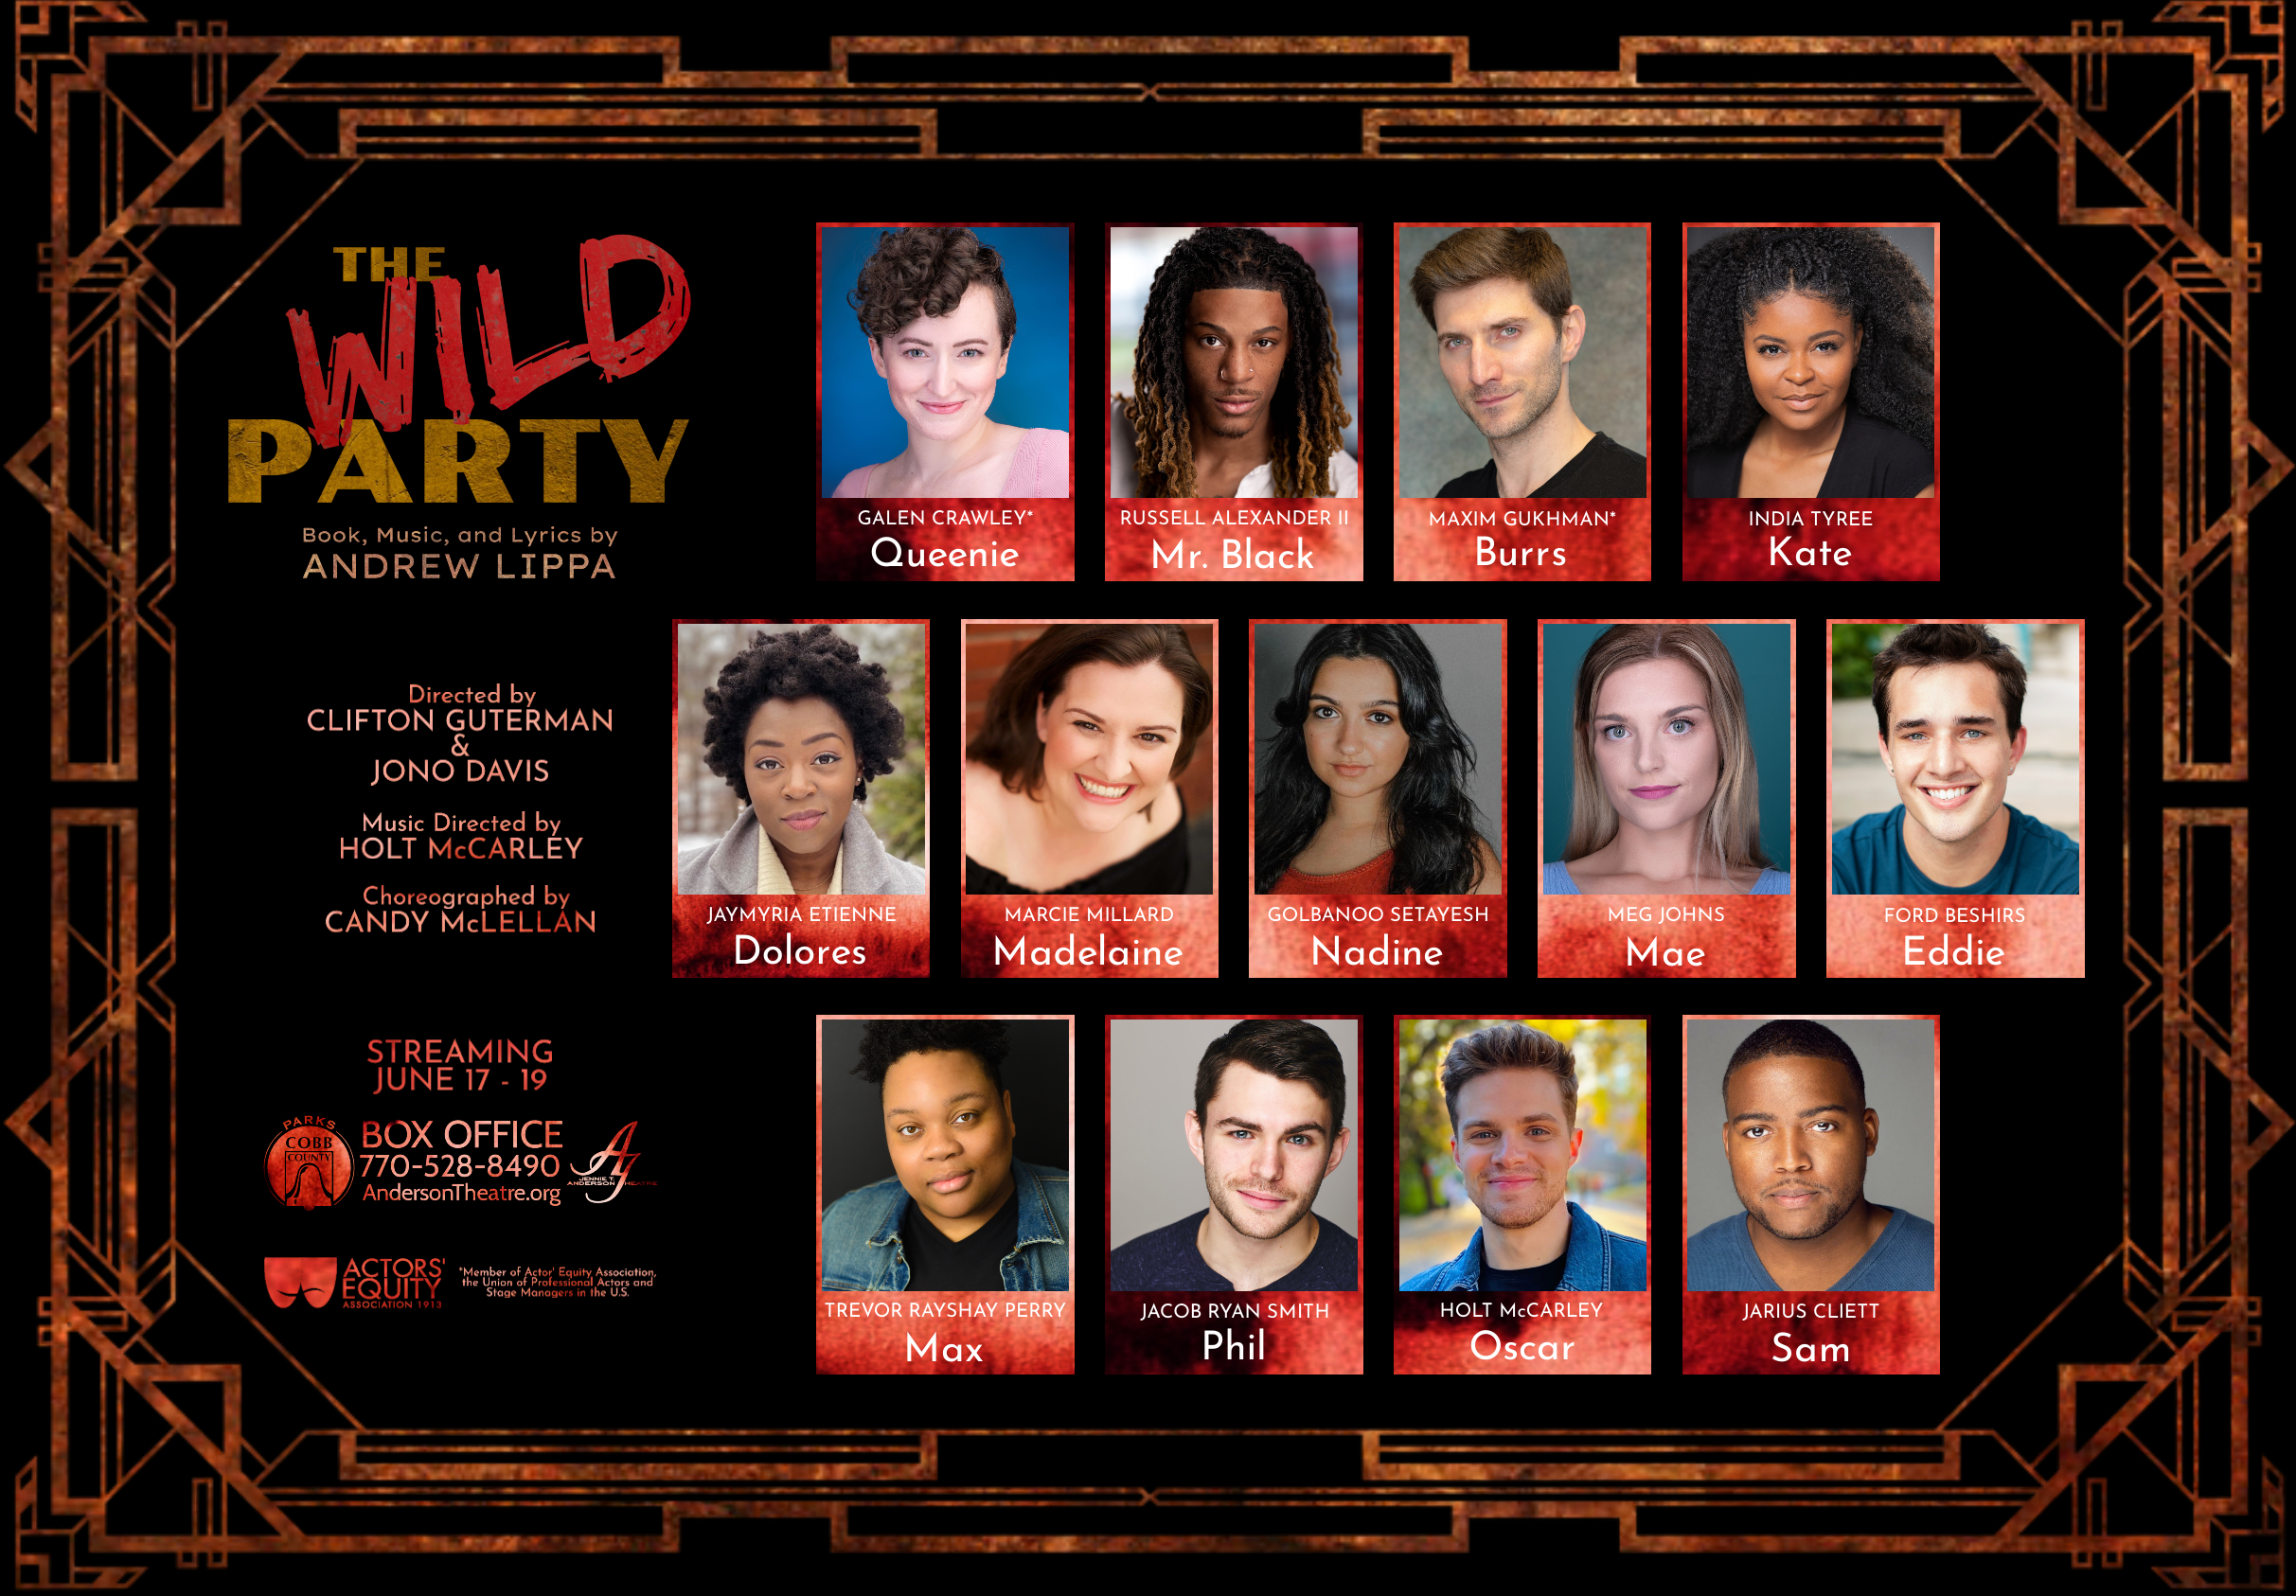 The cast of THE WILD PARTY